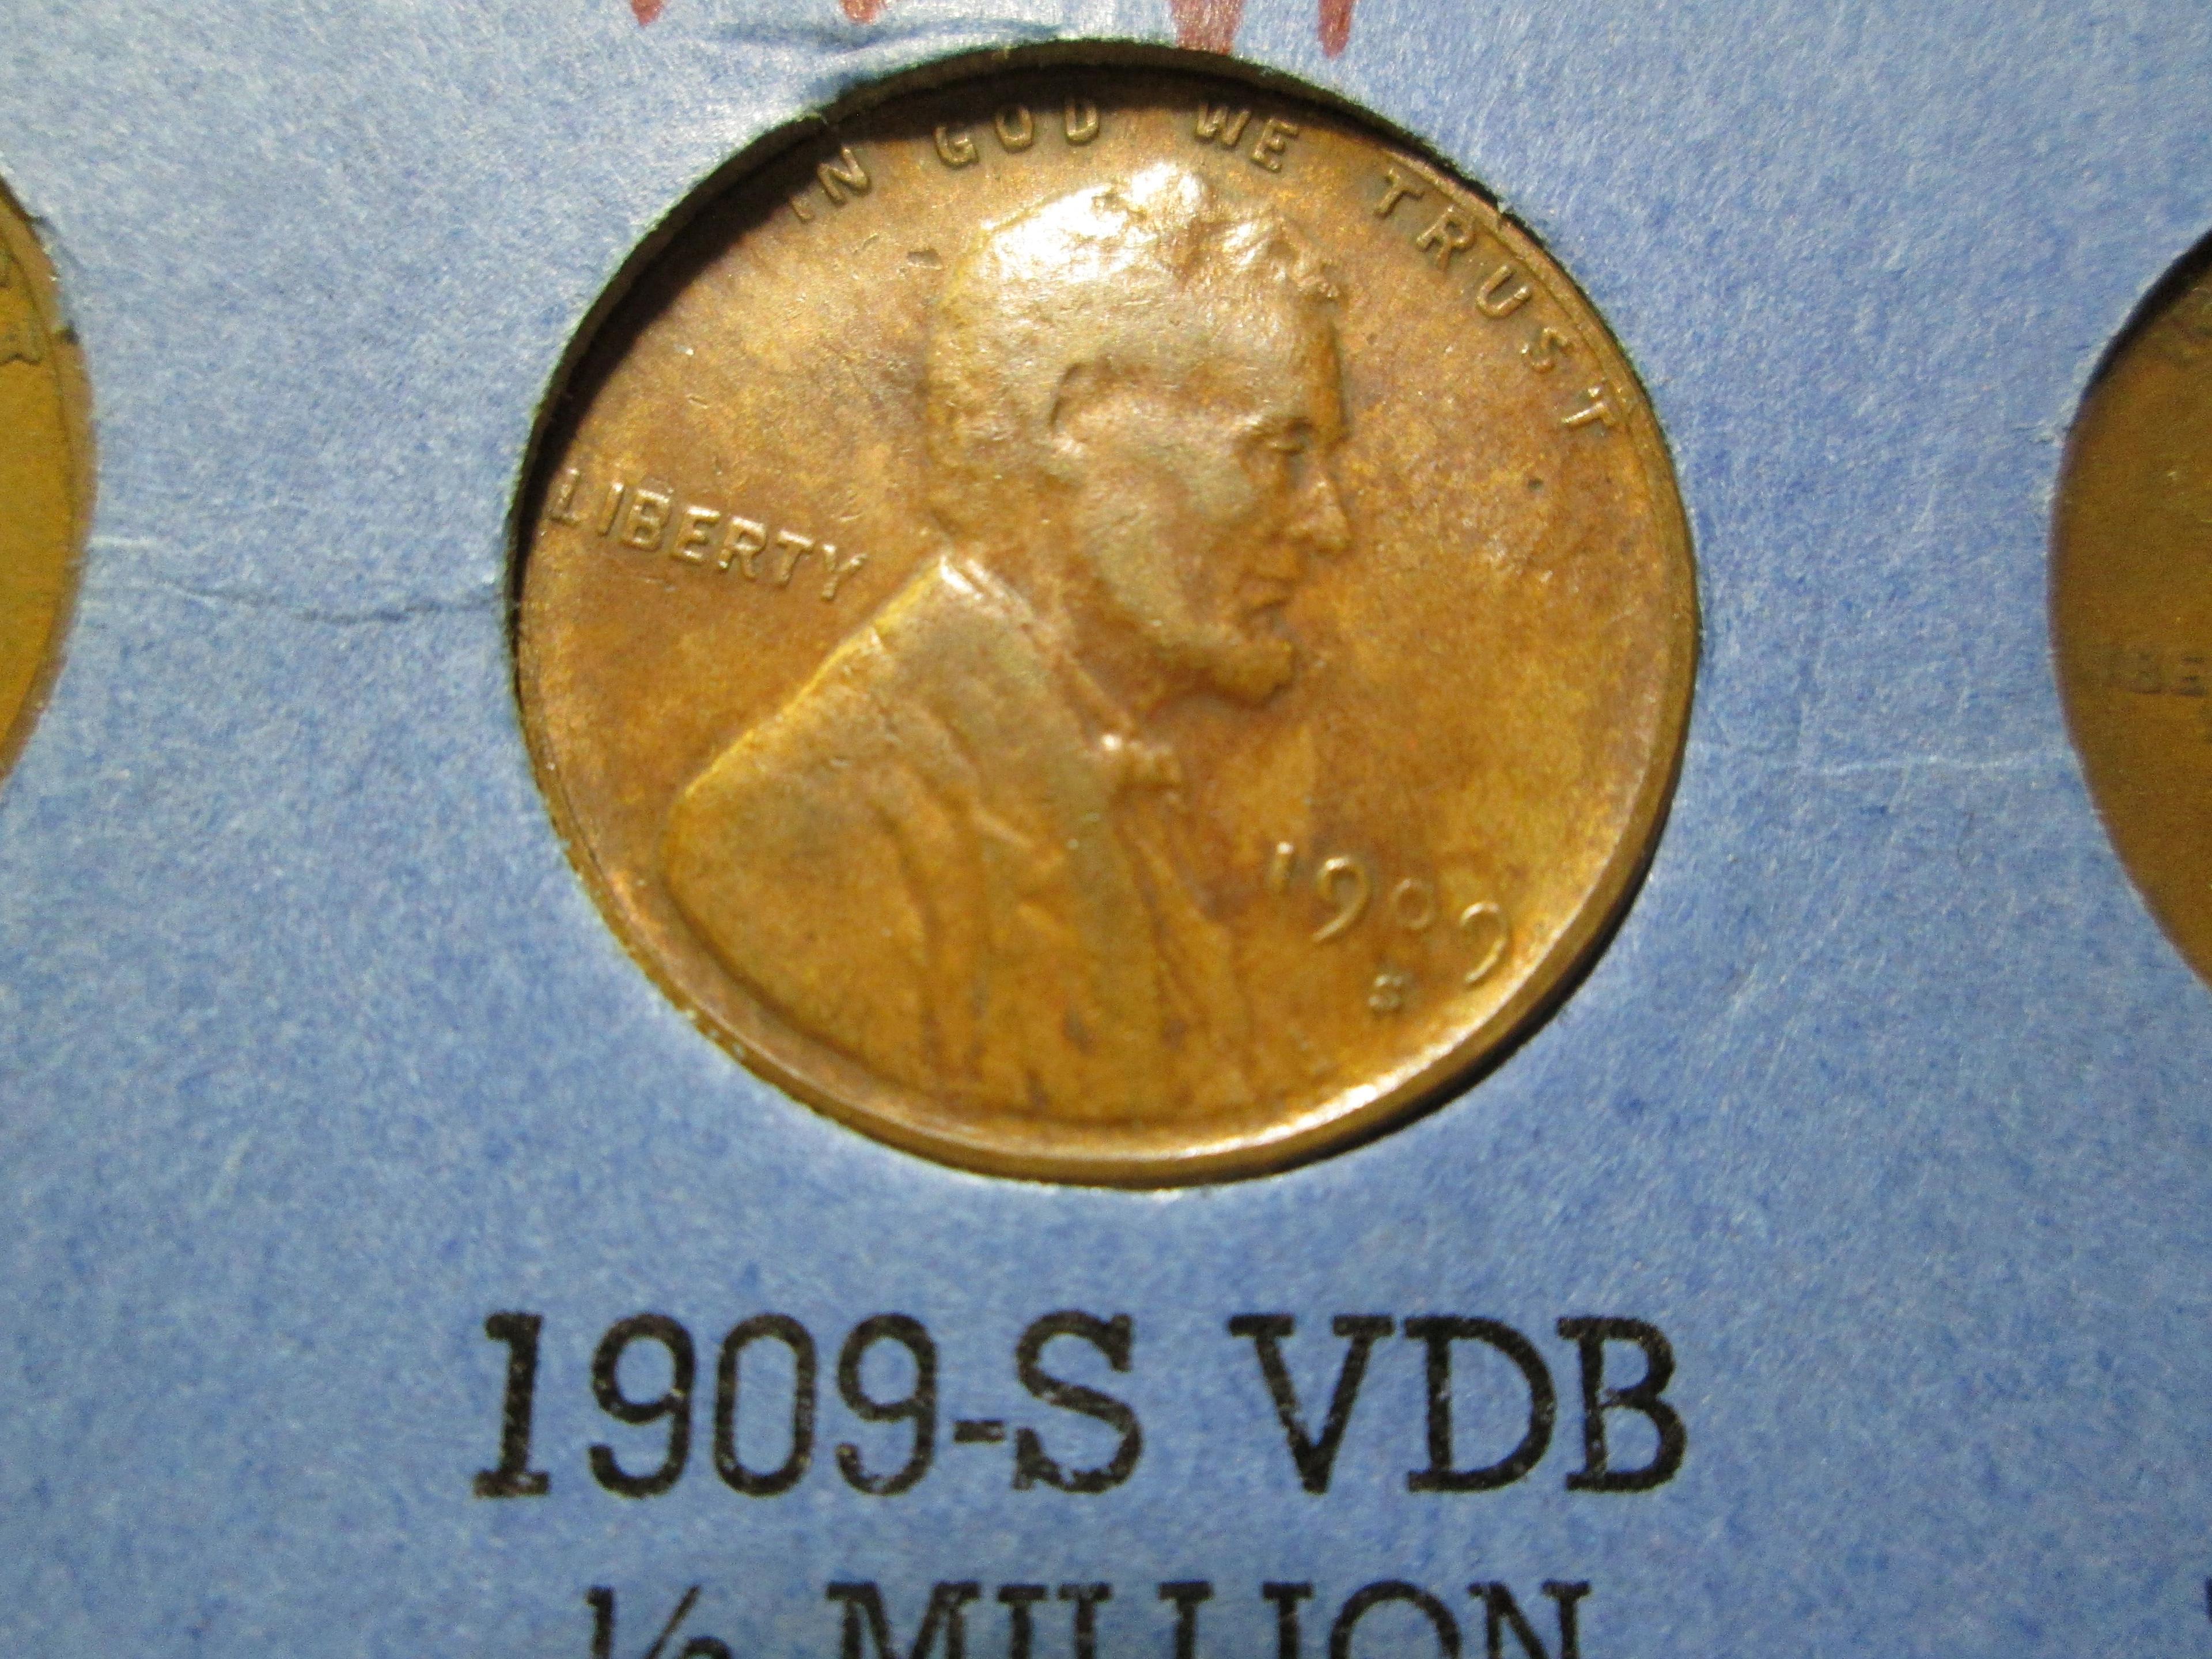 1909-40 Nearly Complete Set of Lincoln Cents, the 1909 S VDB appears to have an added mint mark, the